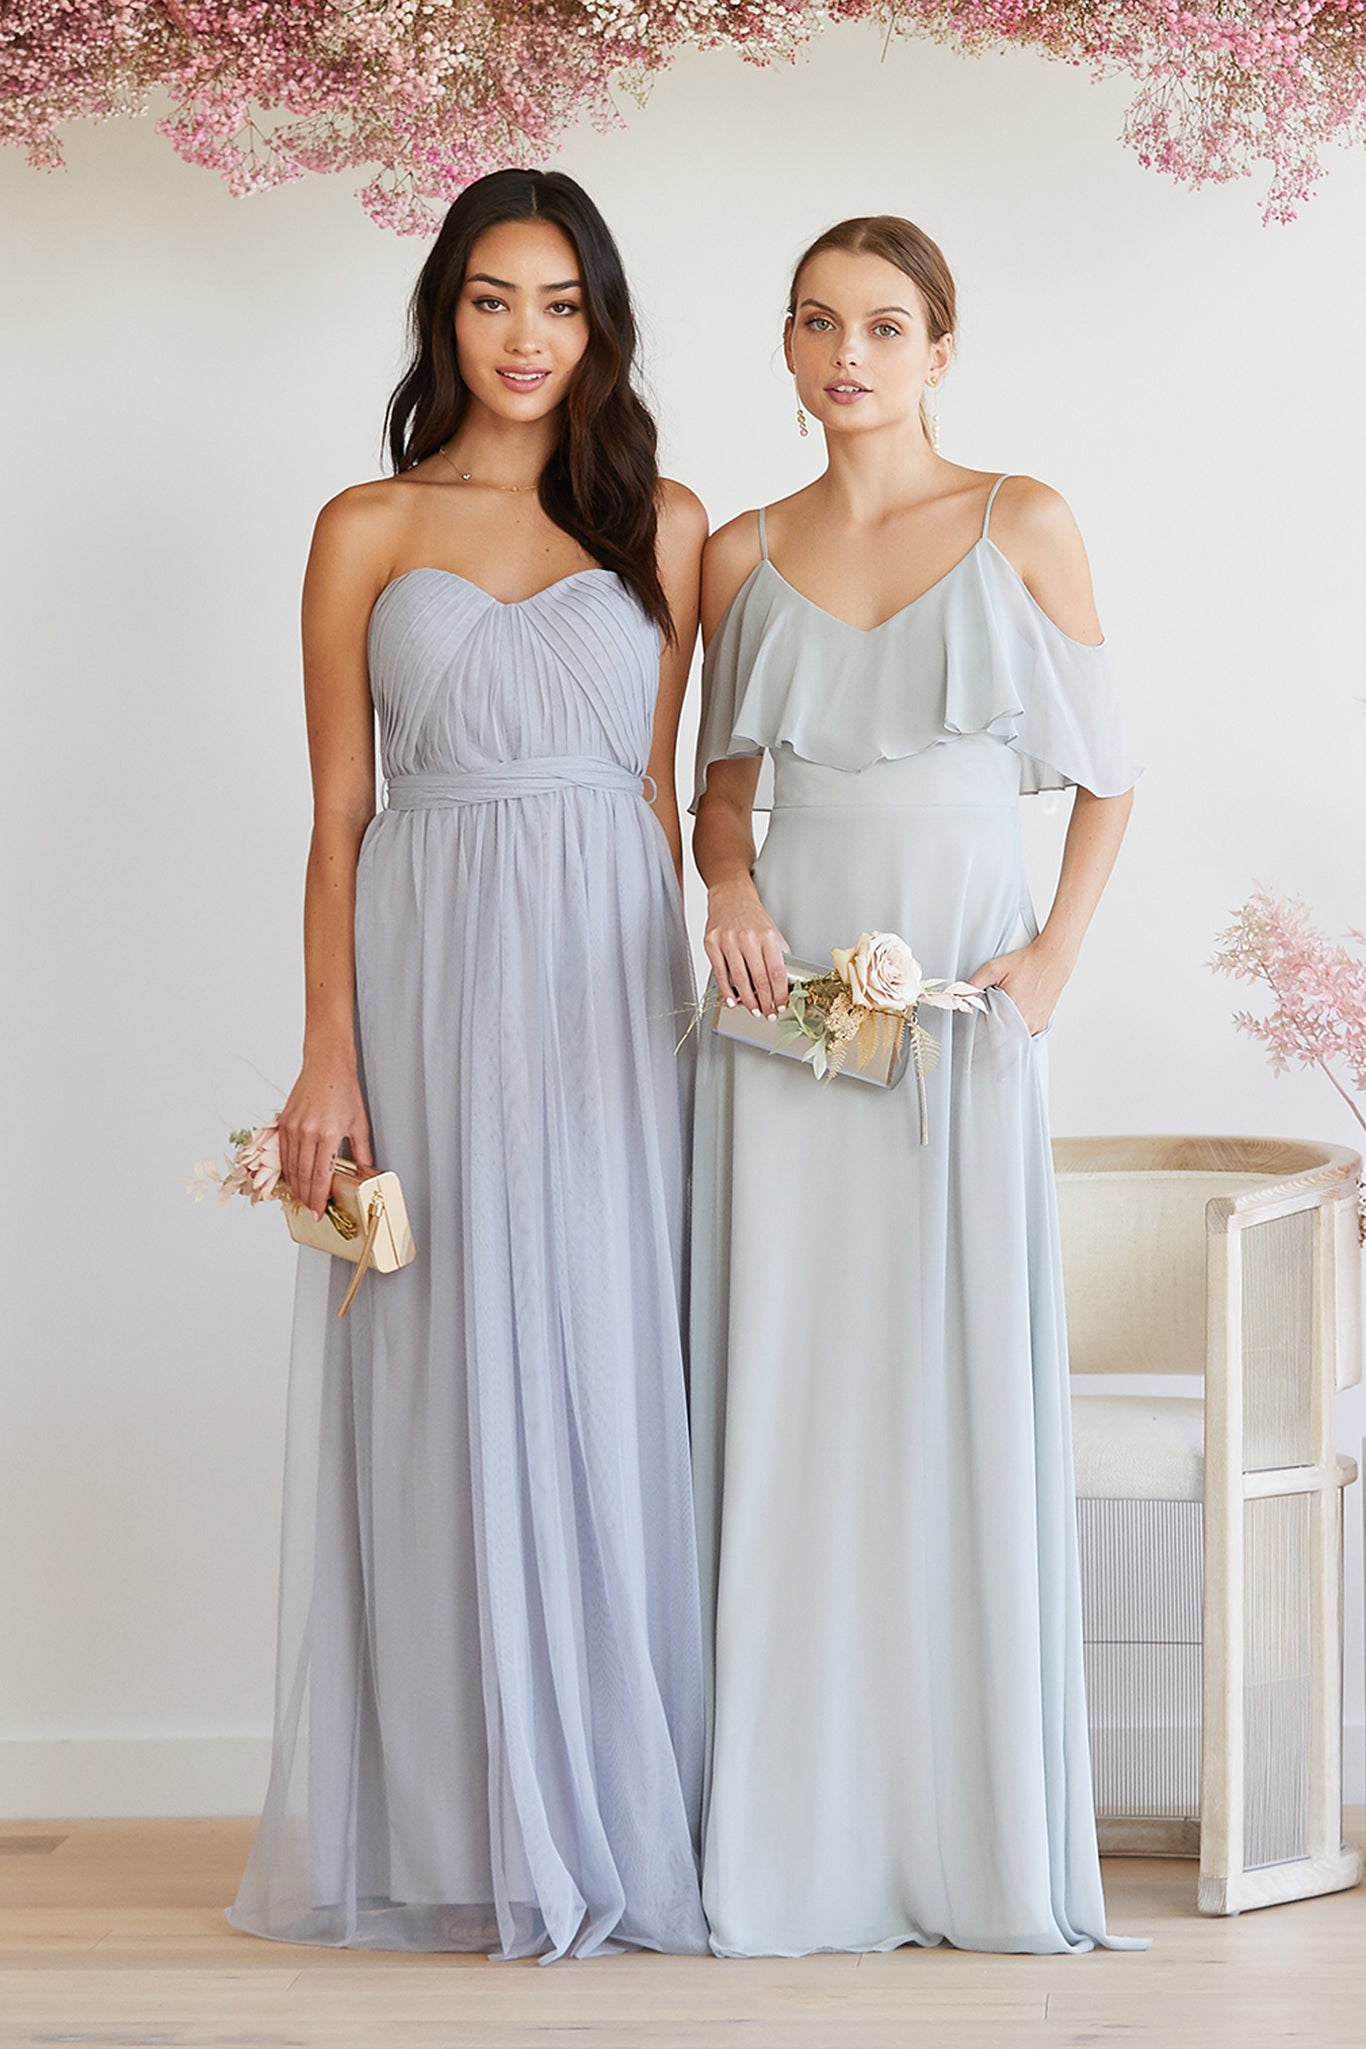 Dove Gray Jane Convertible Dress by Birdy Grey